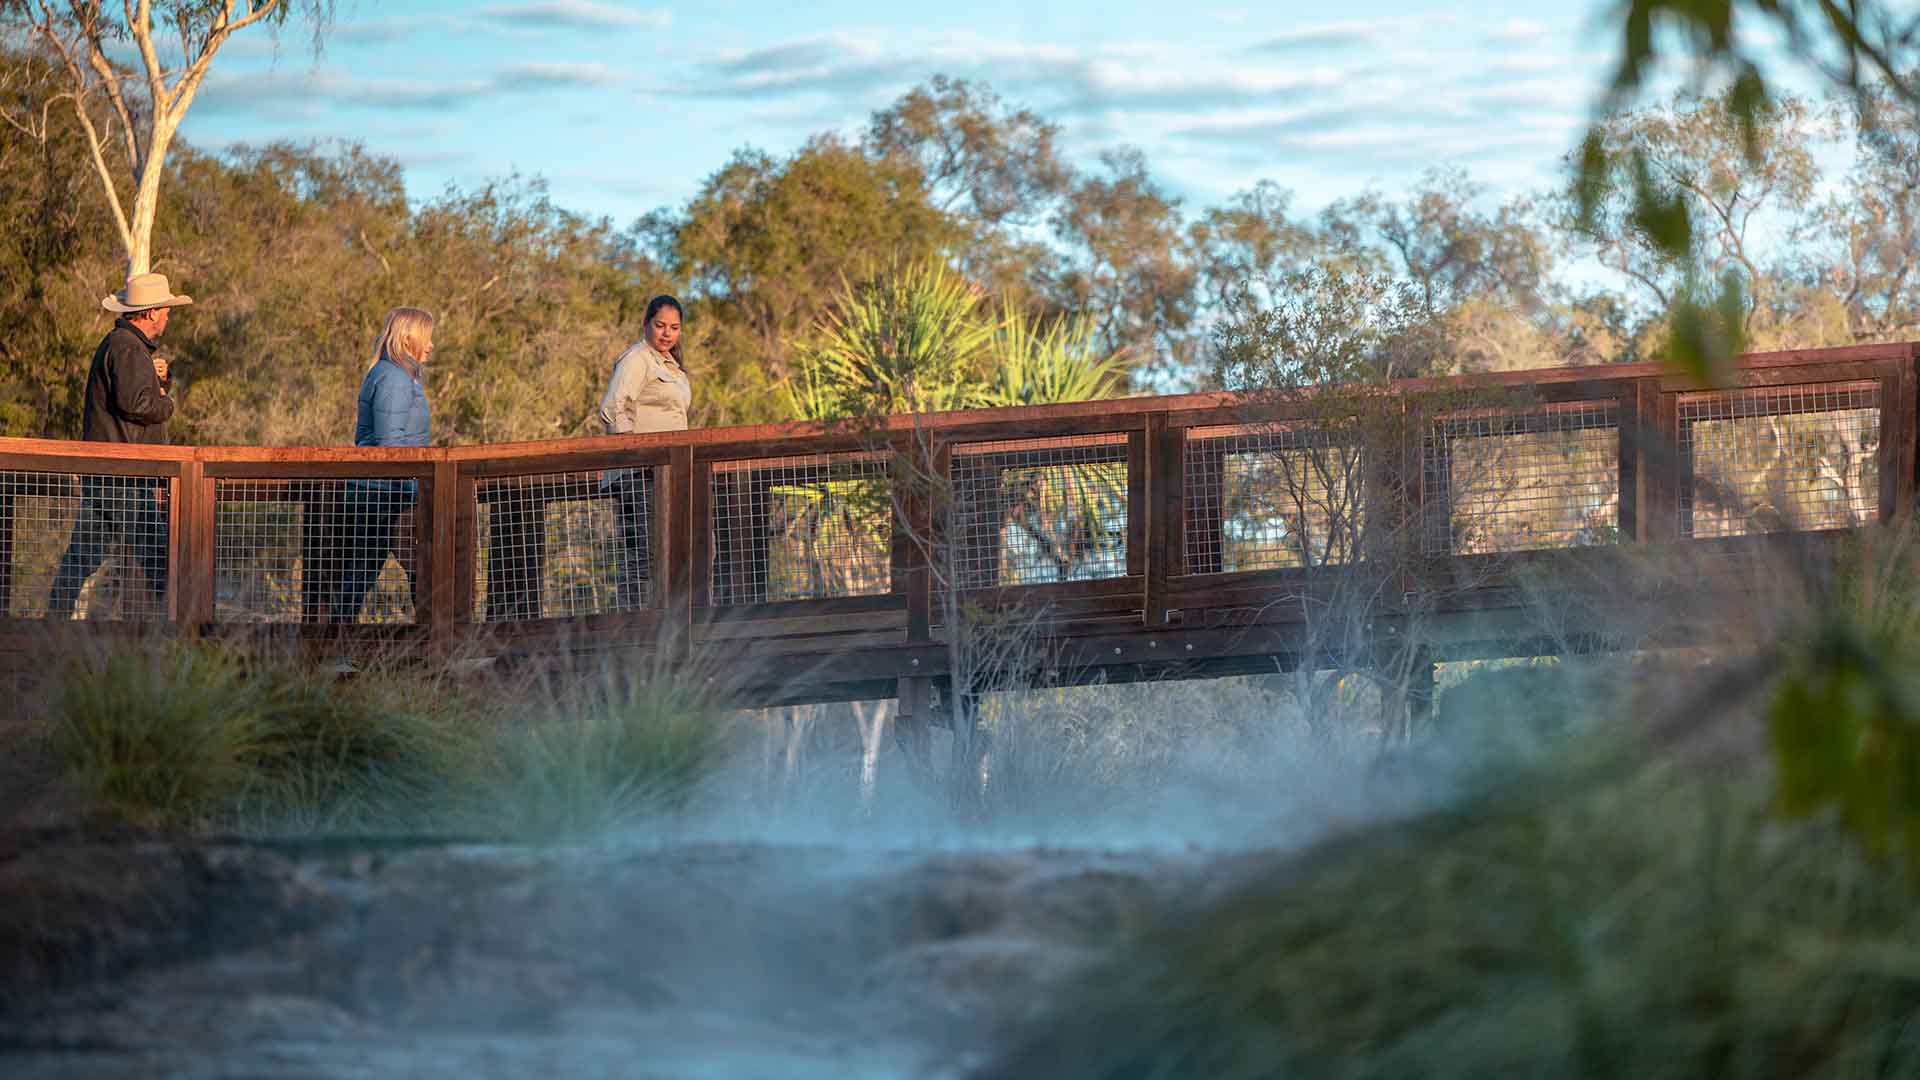 New Hot Springs Have Opened in Far North Queensland If You Need an Excuse for Your Next Getaway